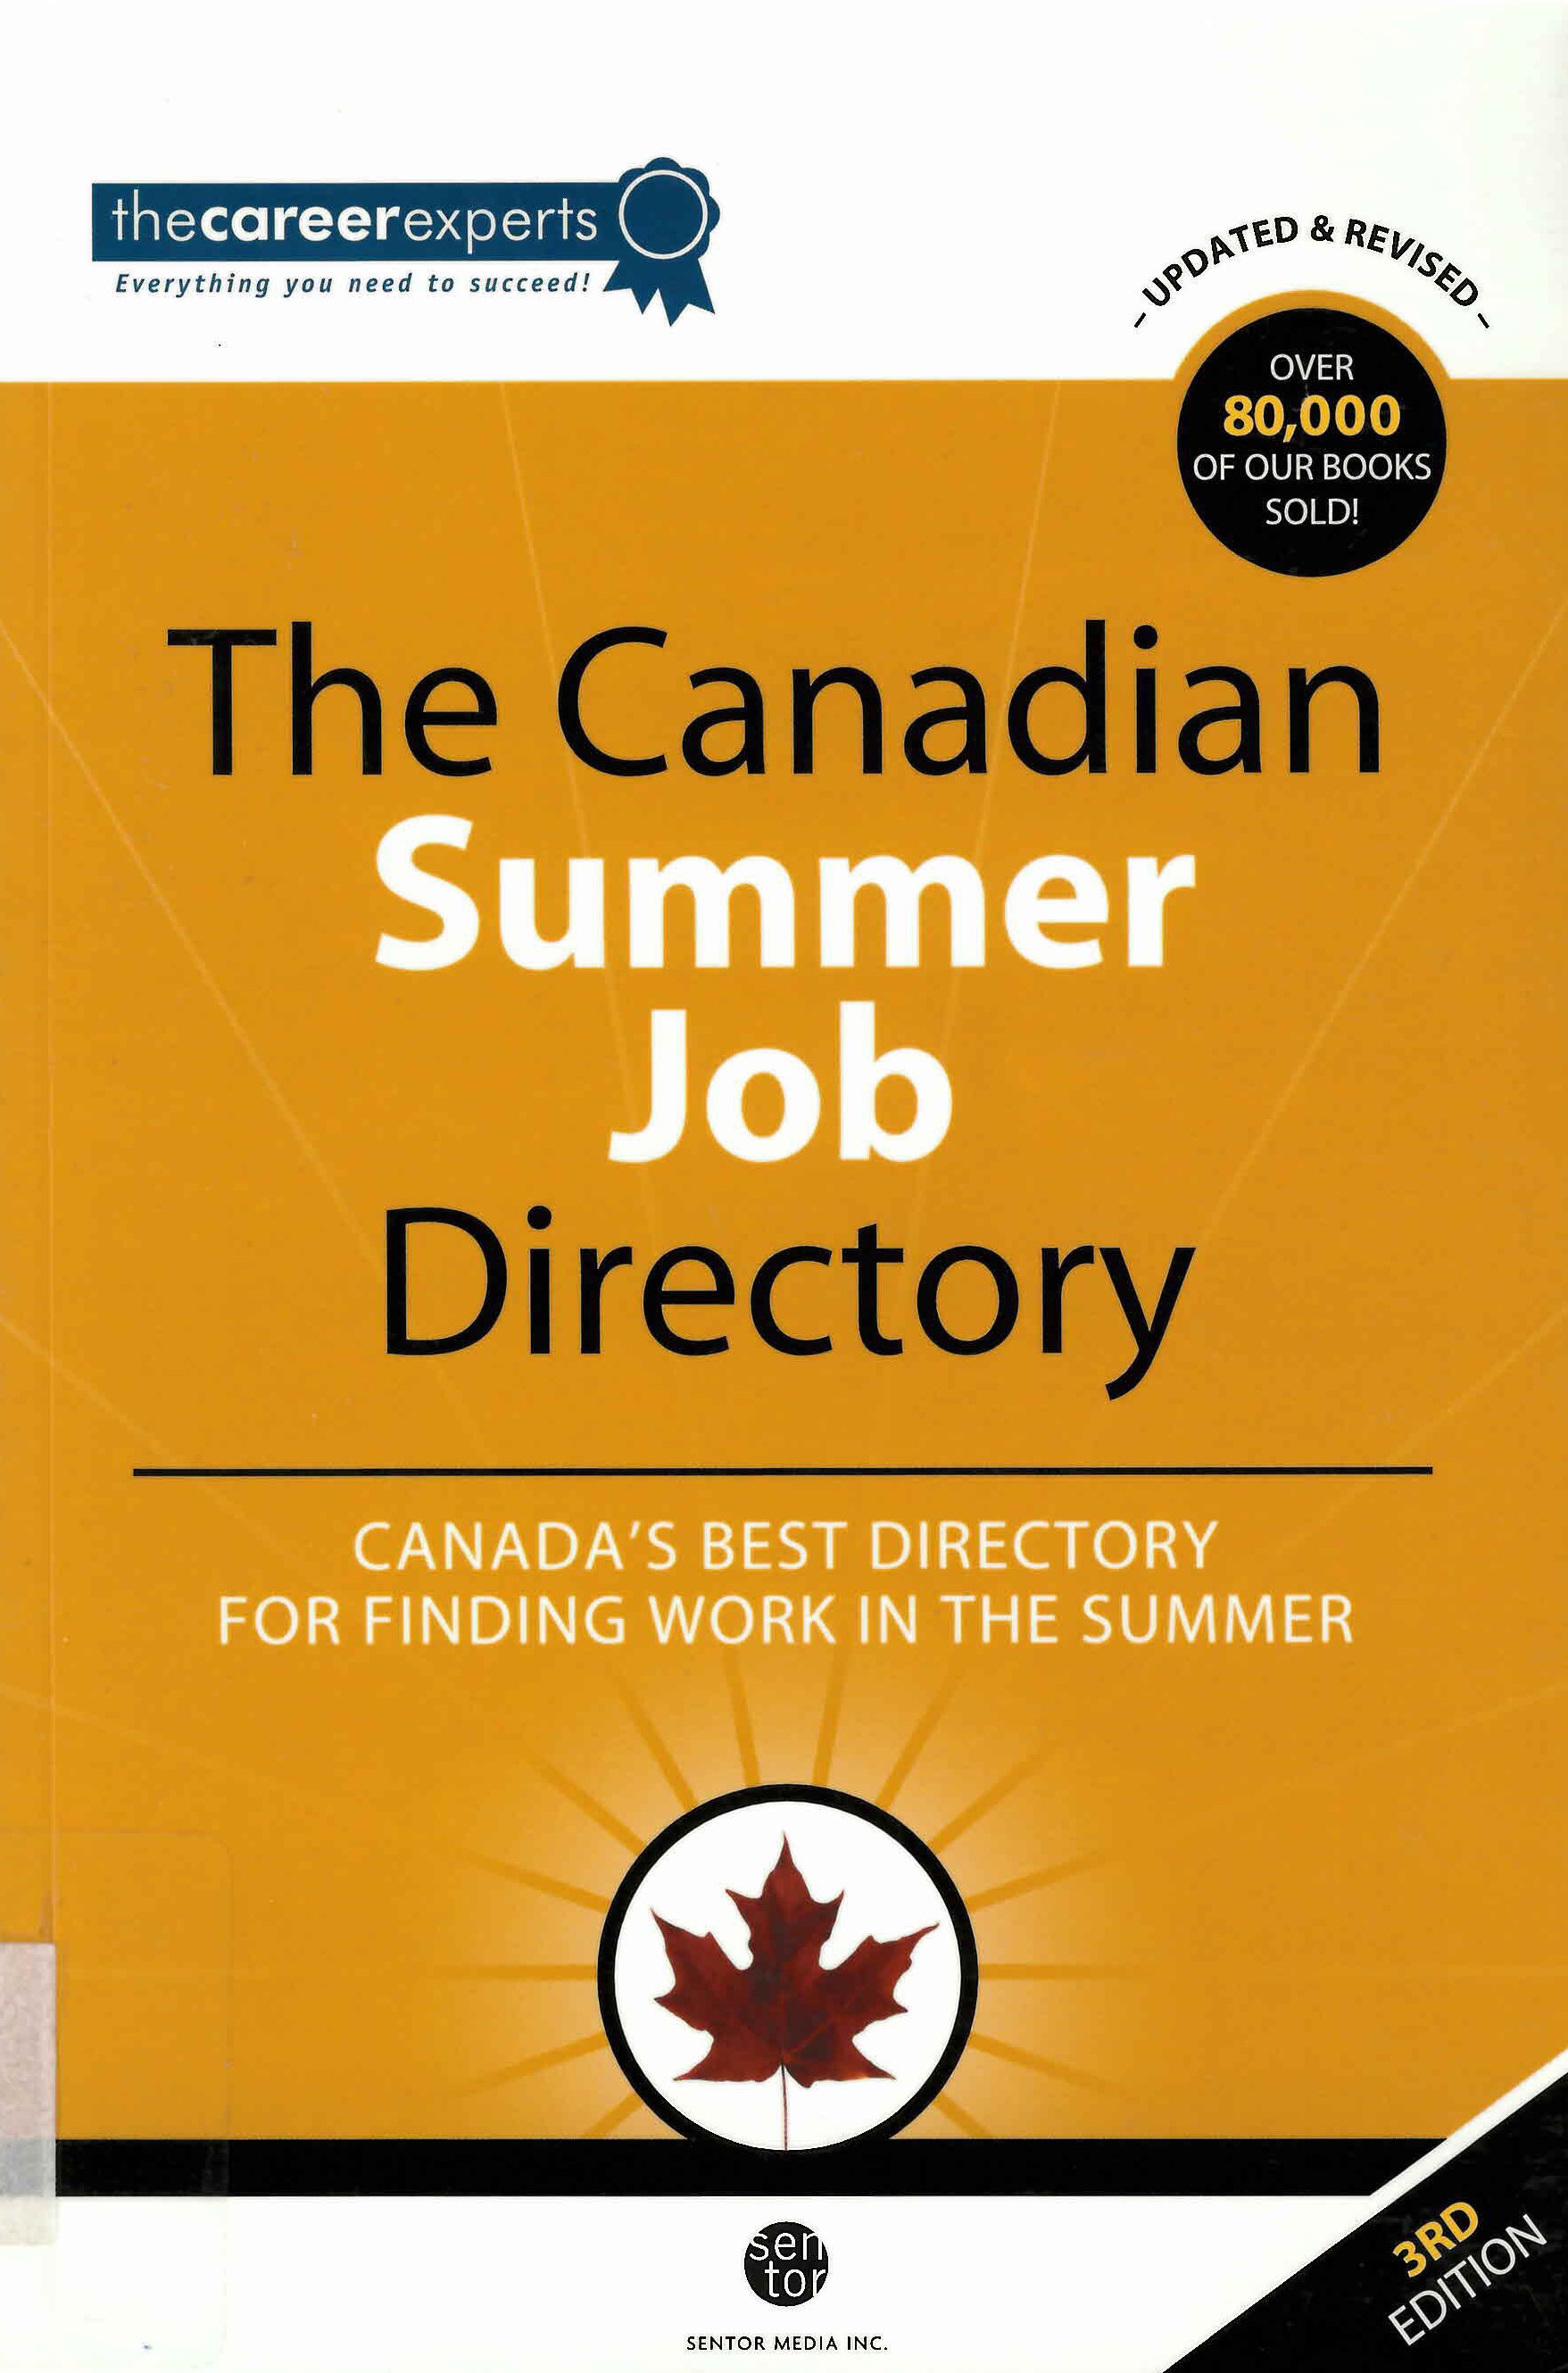 The Canadian summer job directory